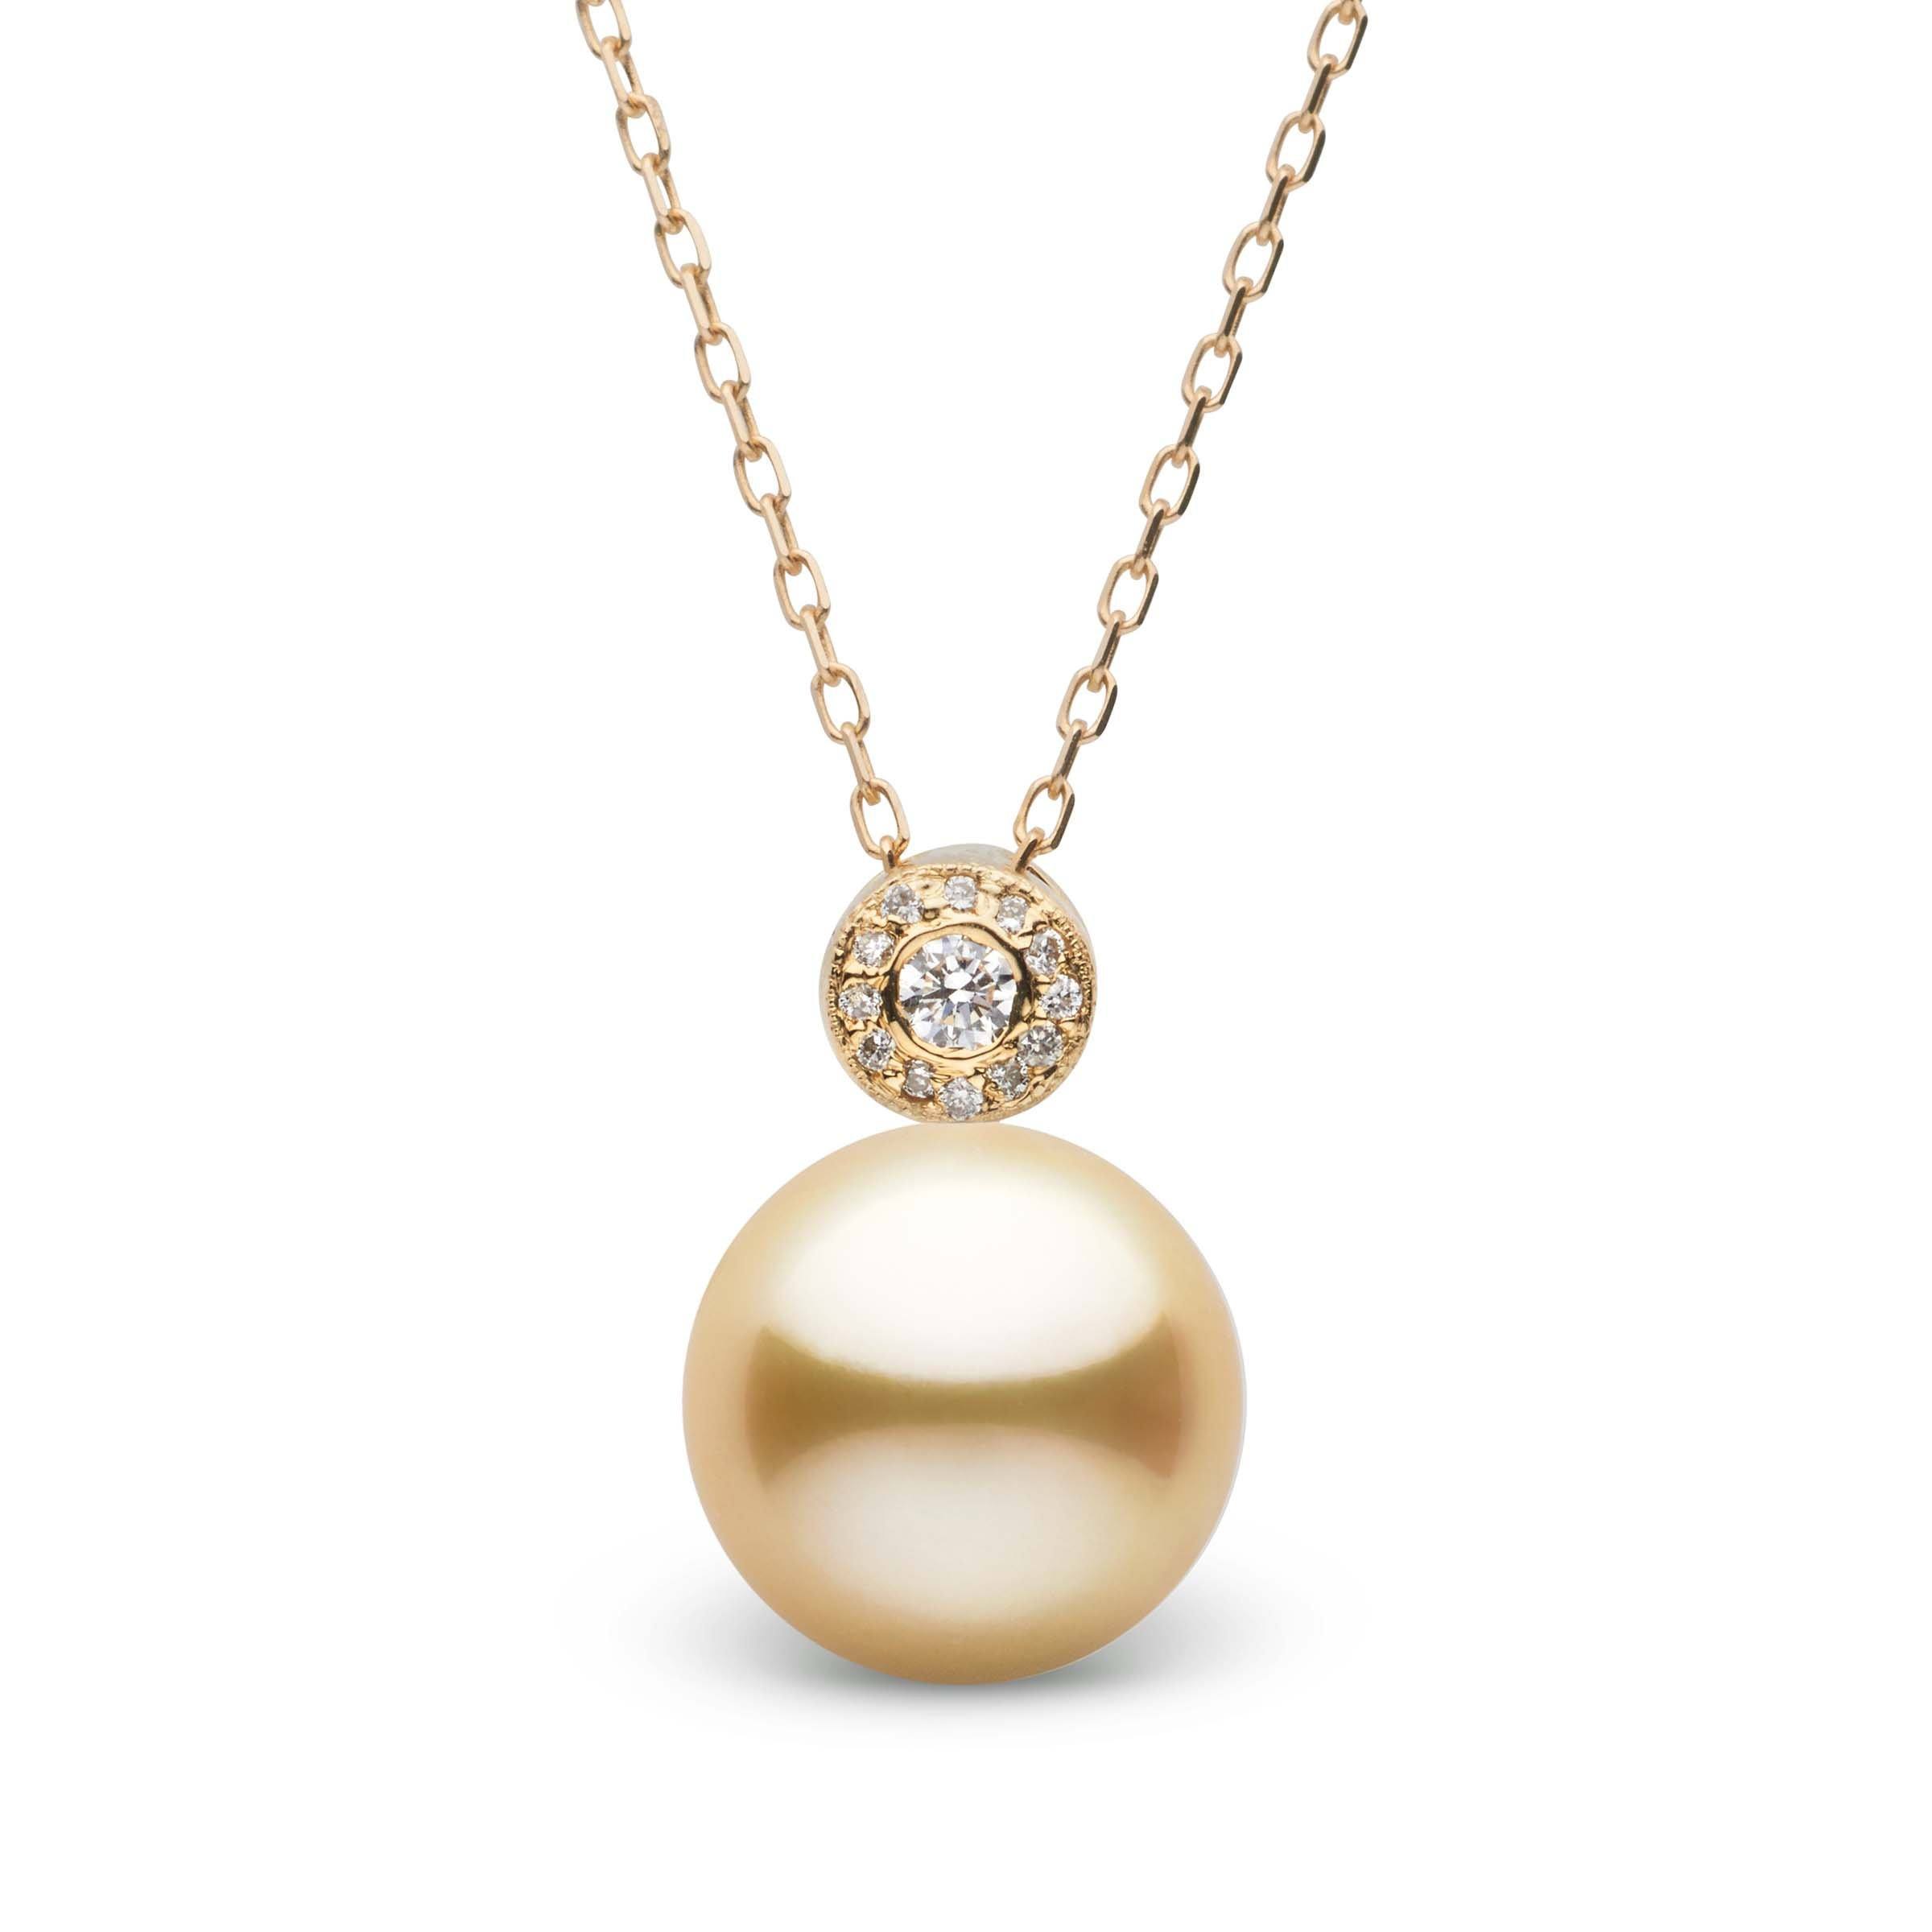 Aura Collection Golden 10.0-11.0 mm South Sea Pearl and Diamond Pendant